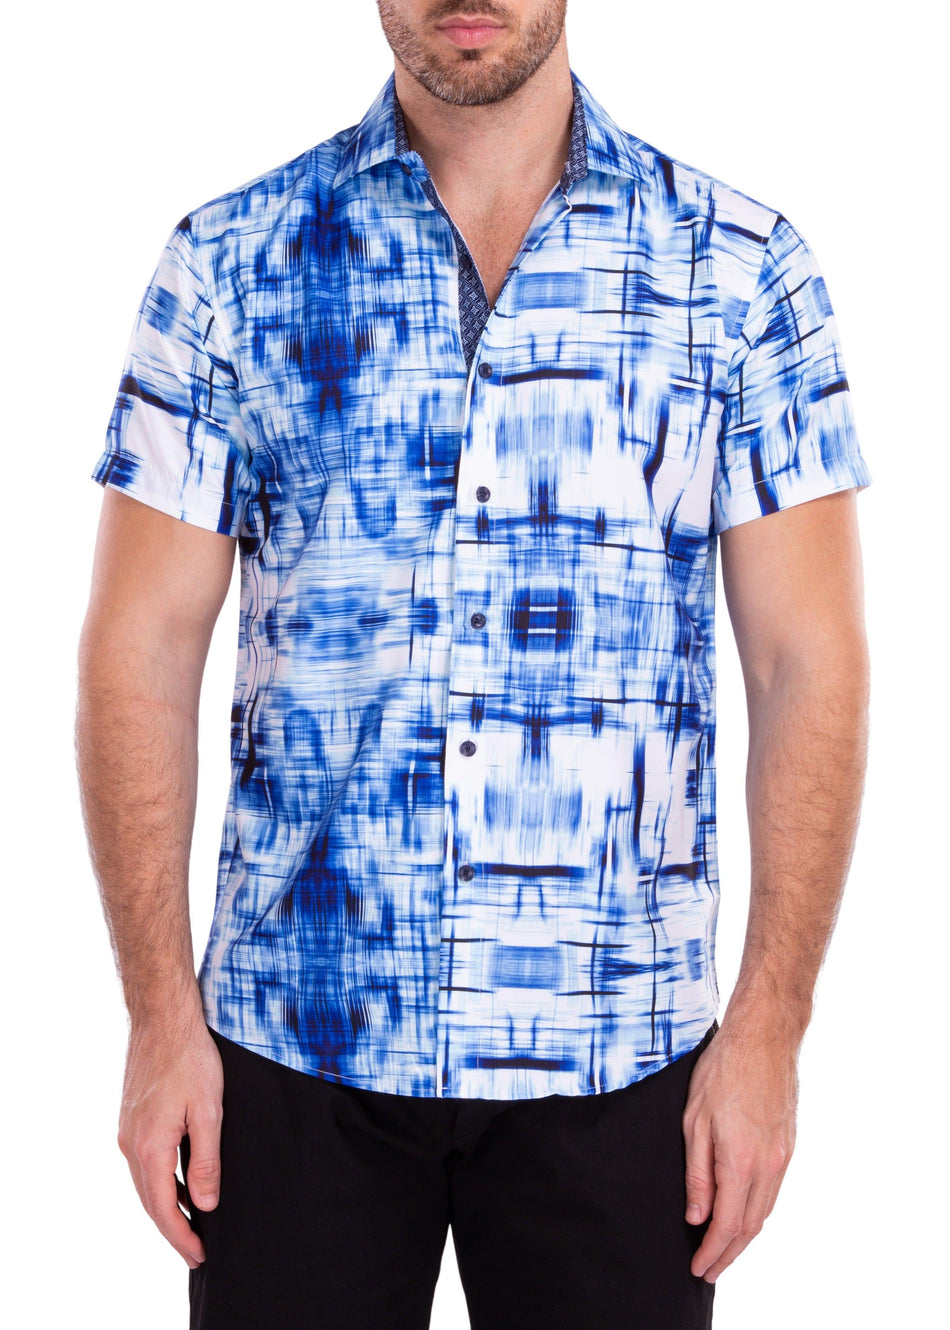 Psychedelic Blue Wash Button Up Short Sleeve Dress Shirt